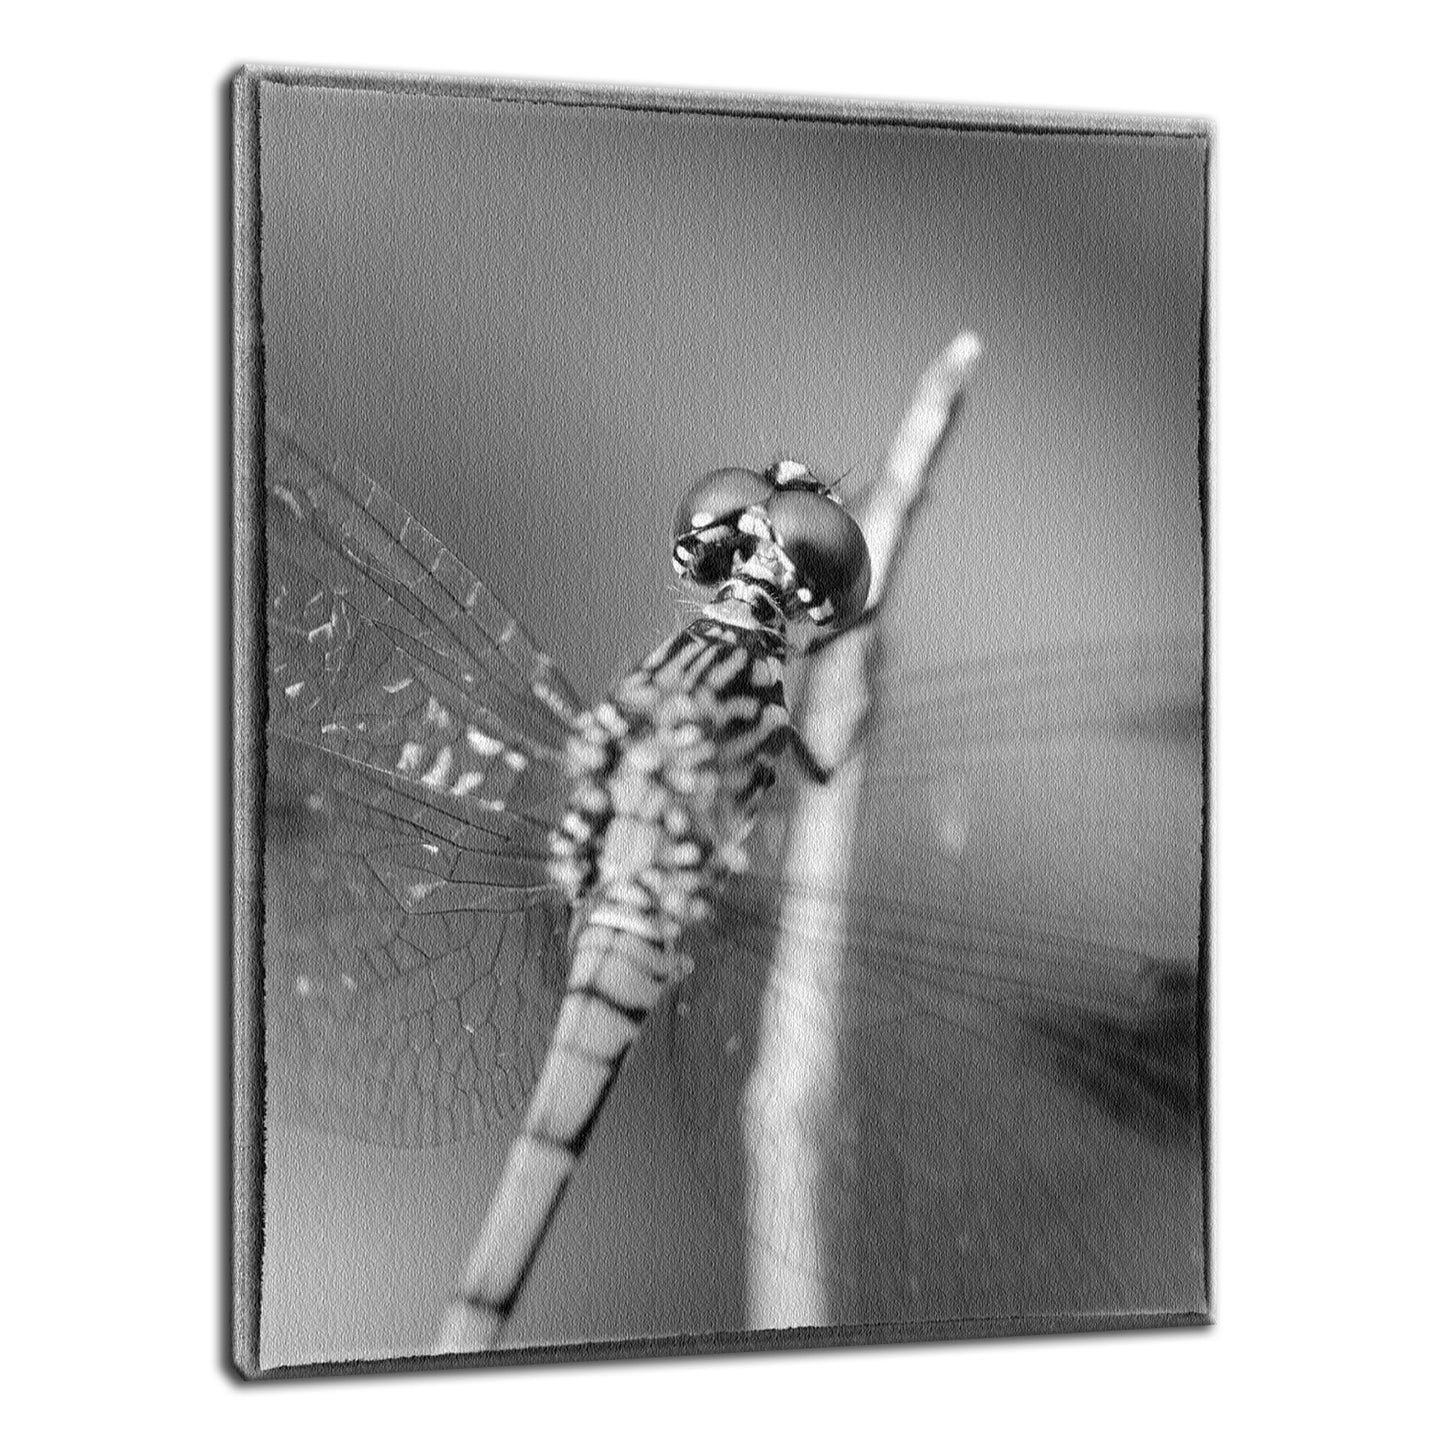 Dragonfly at Bombay Hook in Black and White Animal / Wildlife Photograph Fine Art Canvas & Unframed Wall Art Prints  - PIPAFINEART